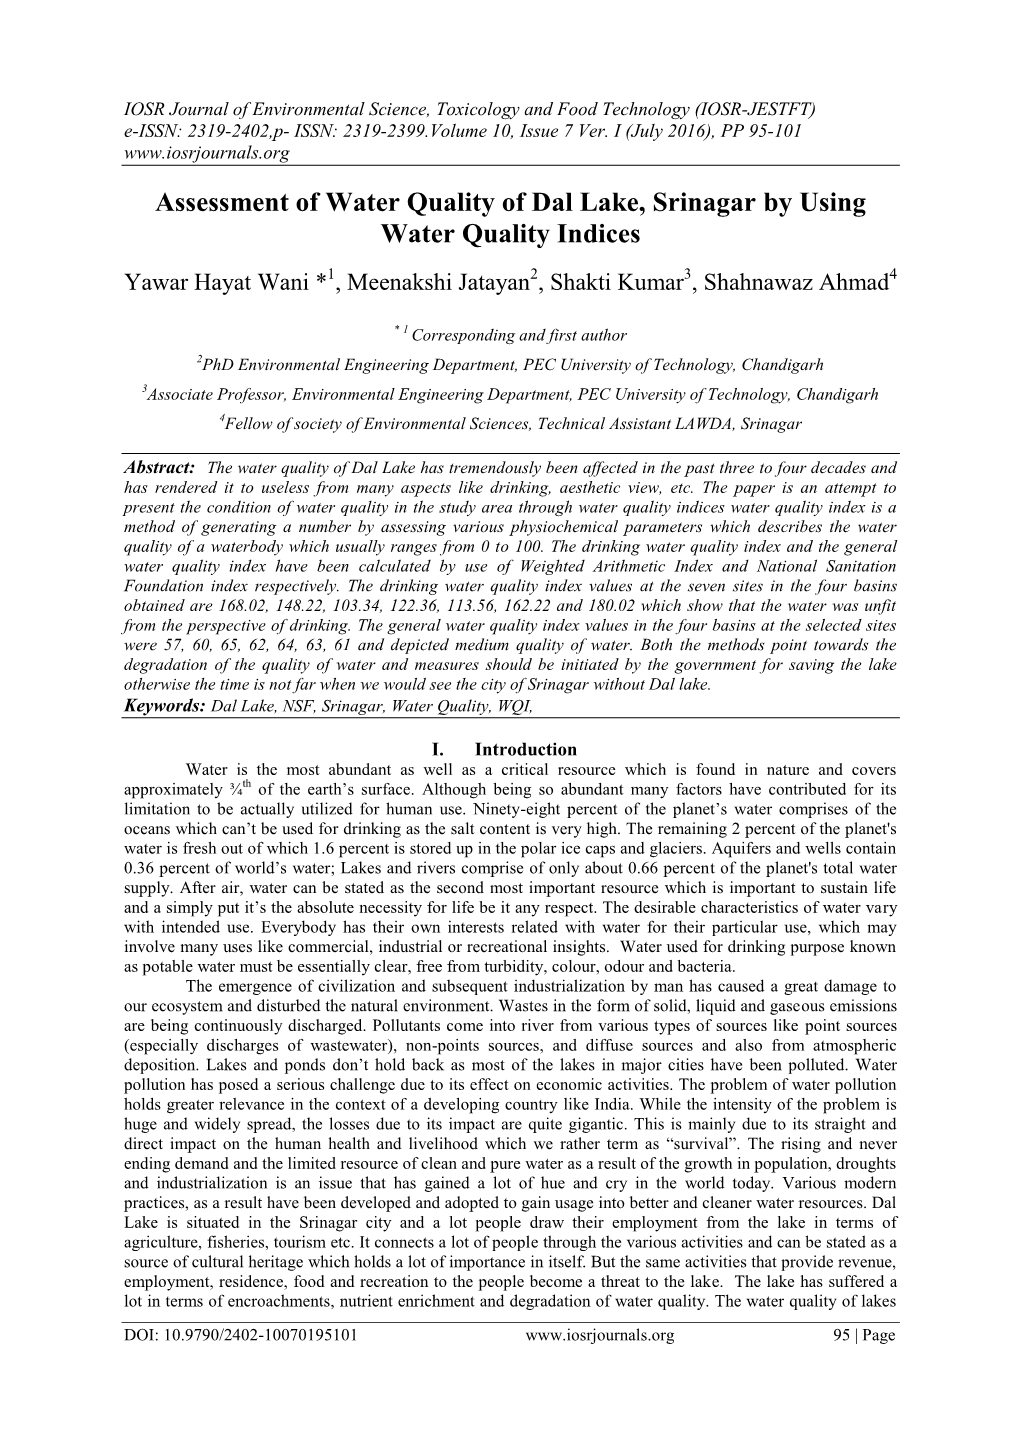 Assessment of Water Quality of Dal Lake, Srinagar by Using Water Quality Indices